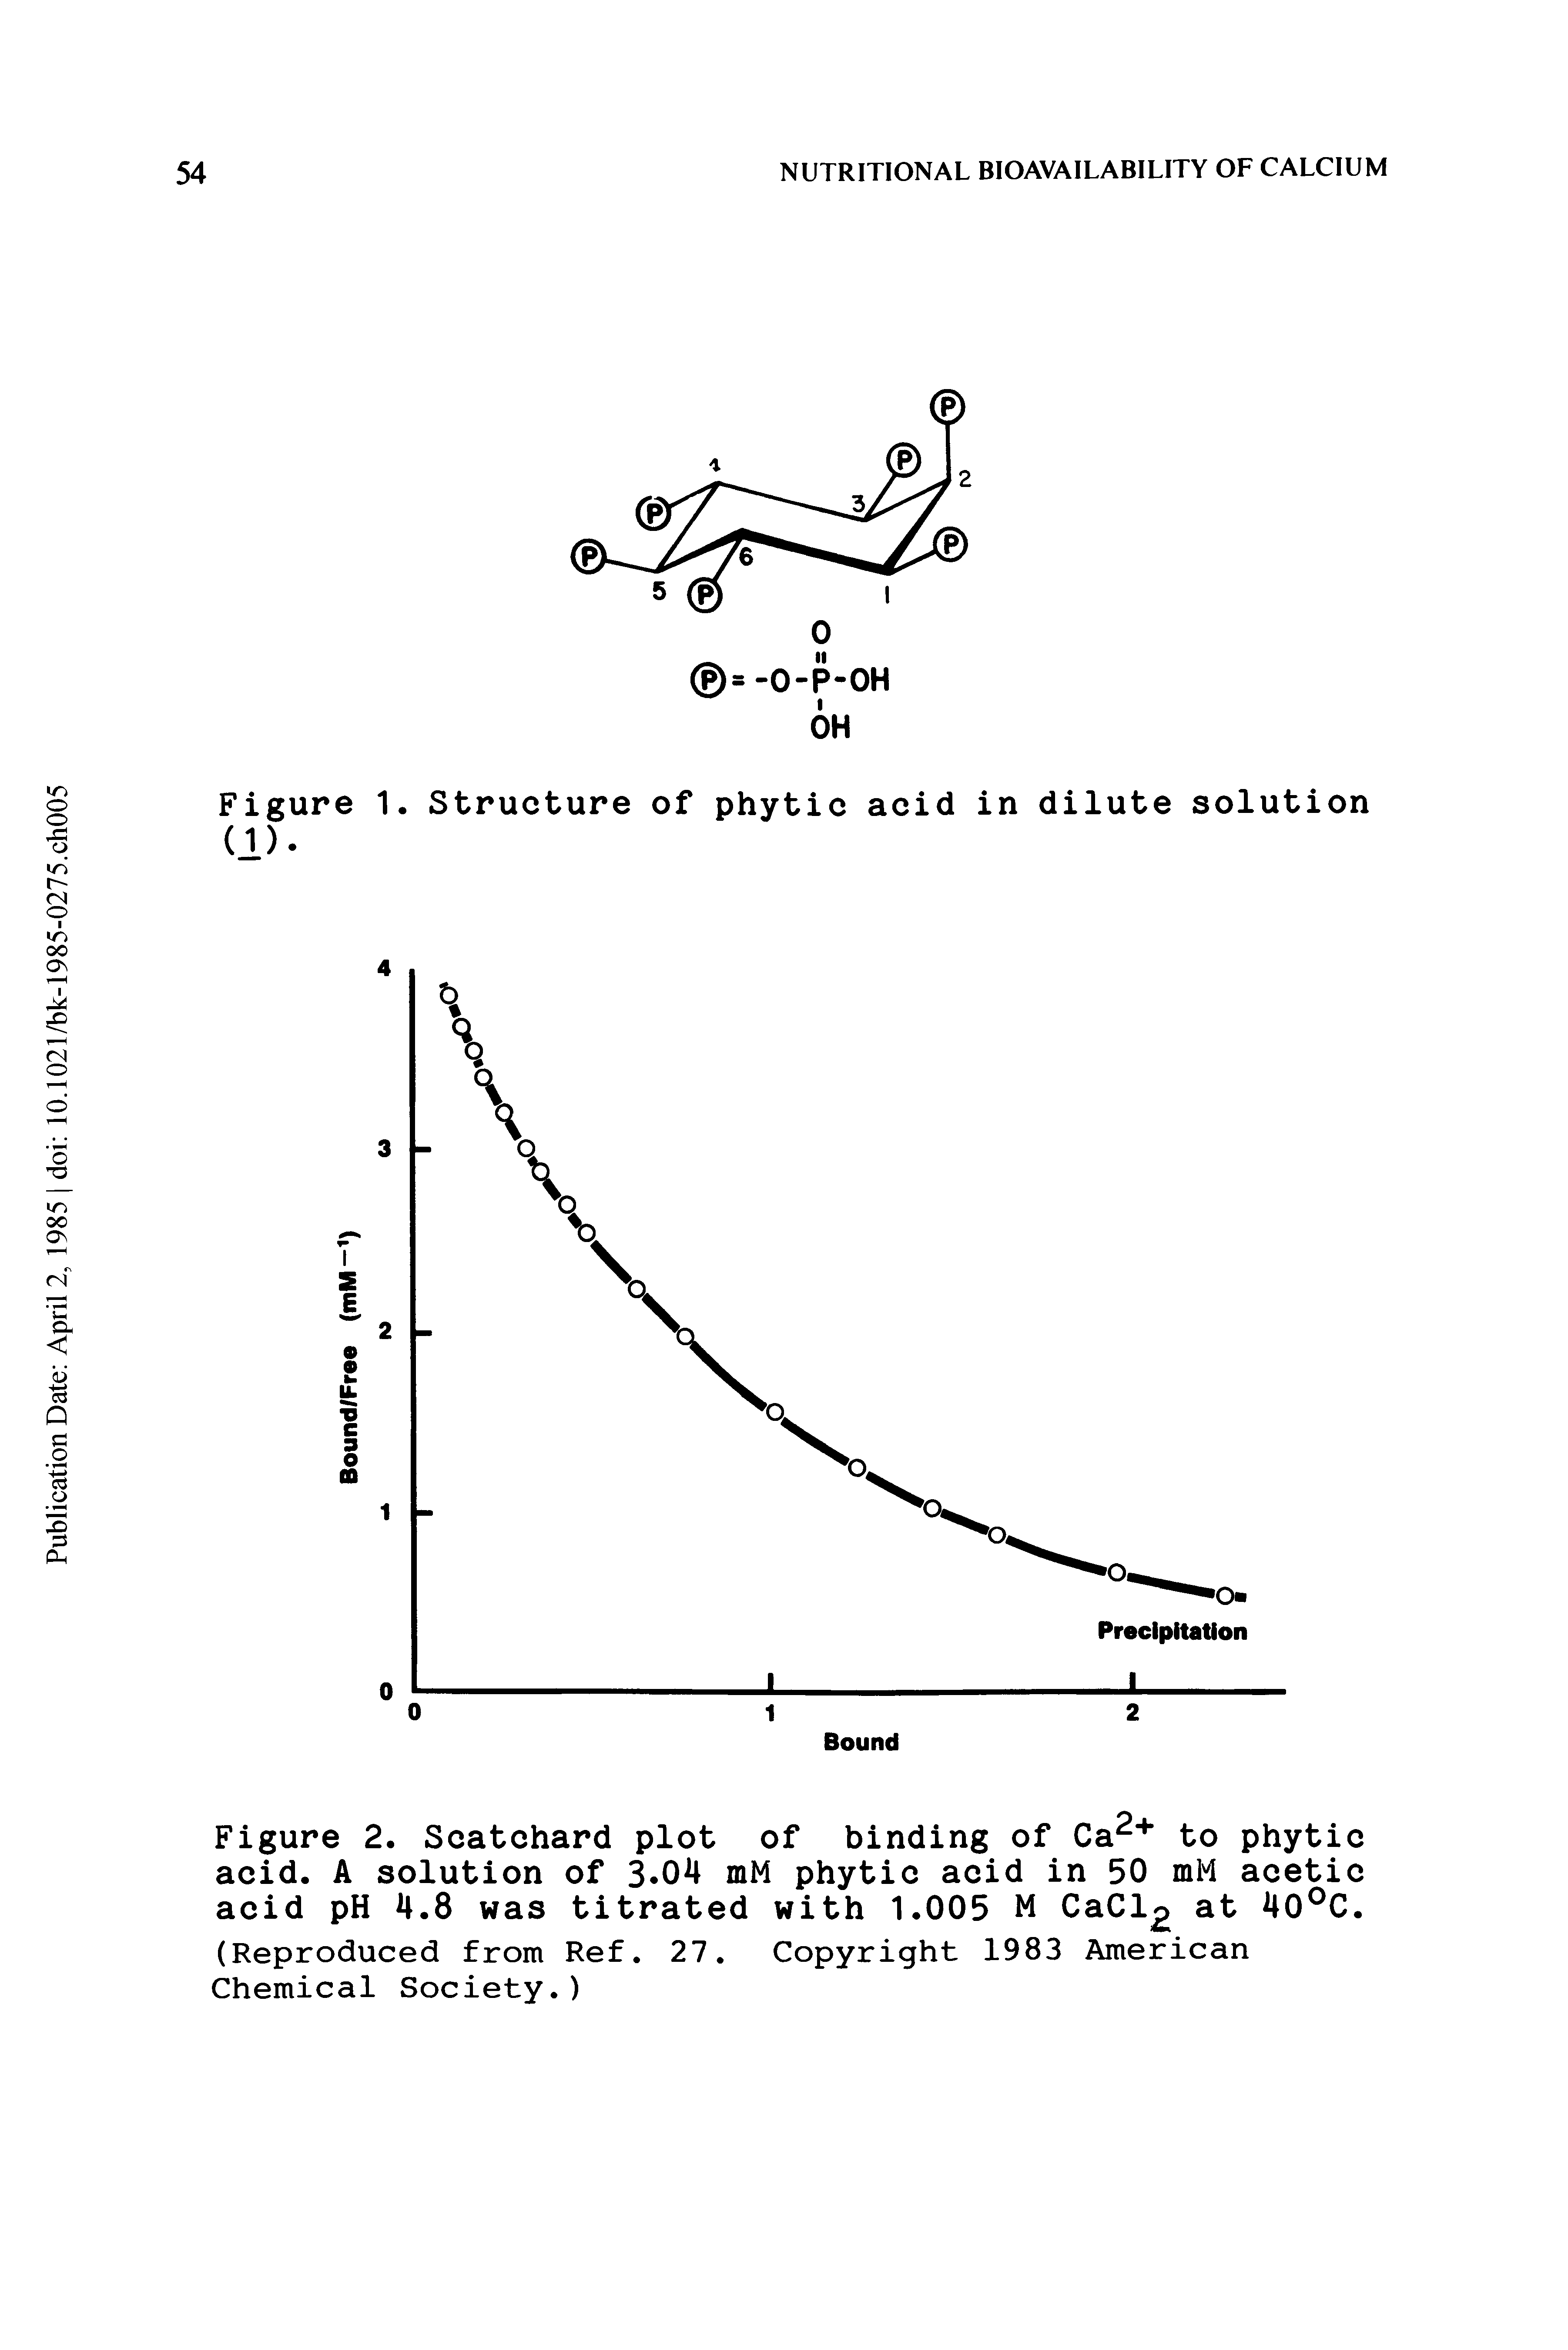 Figure 2. Scatchard plot of binding of Ca2+ to phytic acid. A solution of 3 04 mM phytic acid in 50 mM acetic acid pH 4.8 was titrated with 1.005 M CaCl at 40°C.